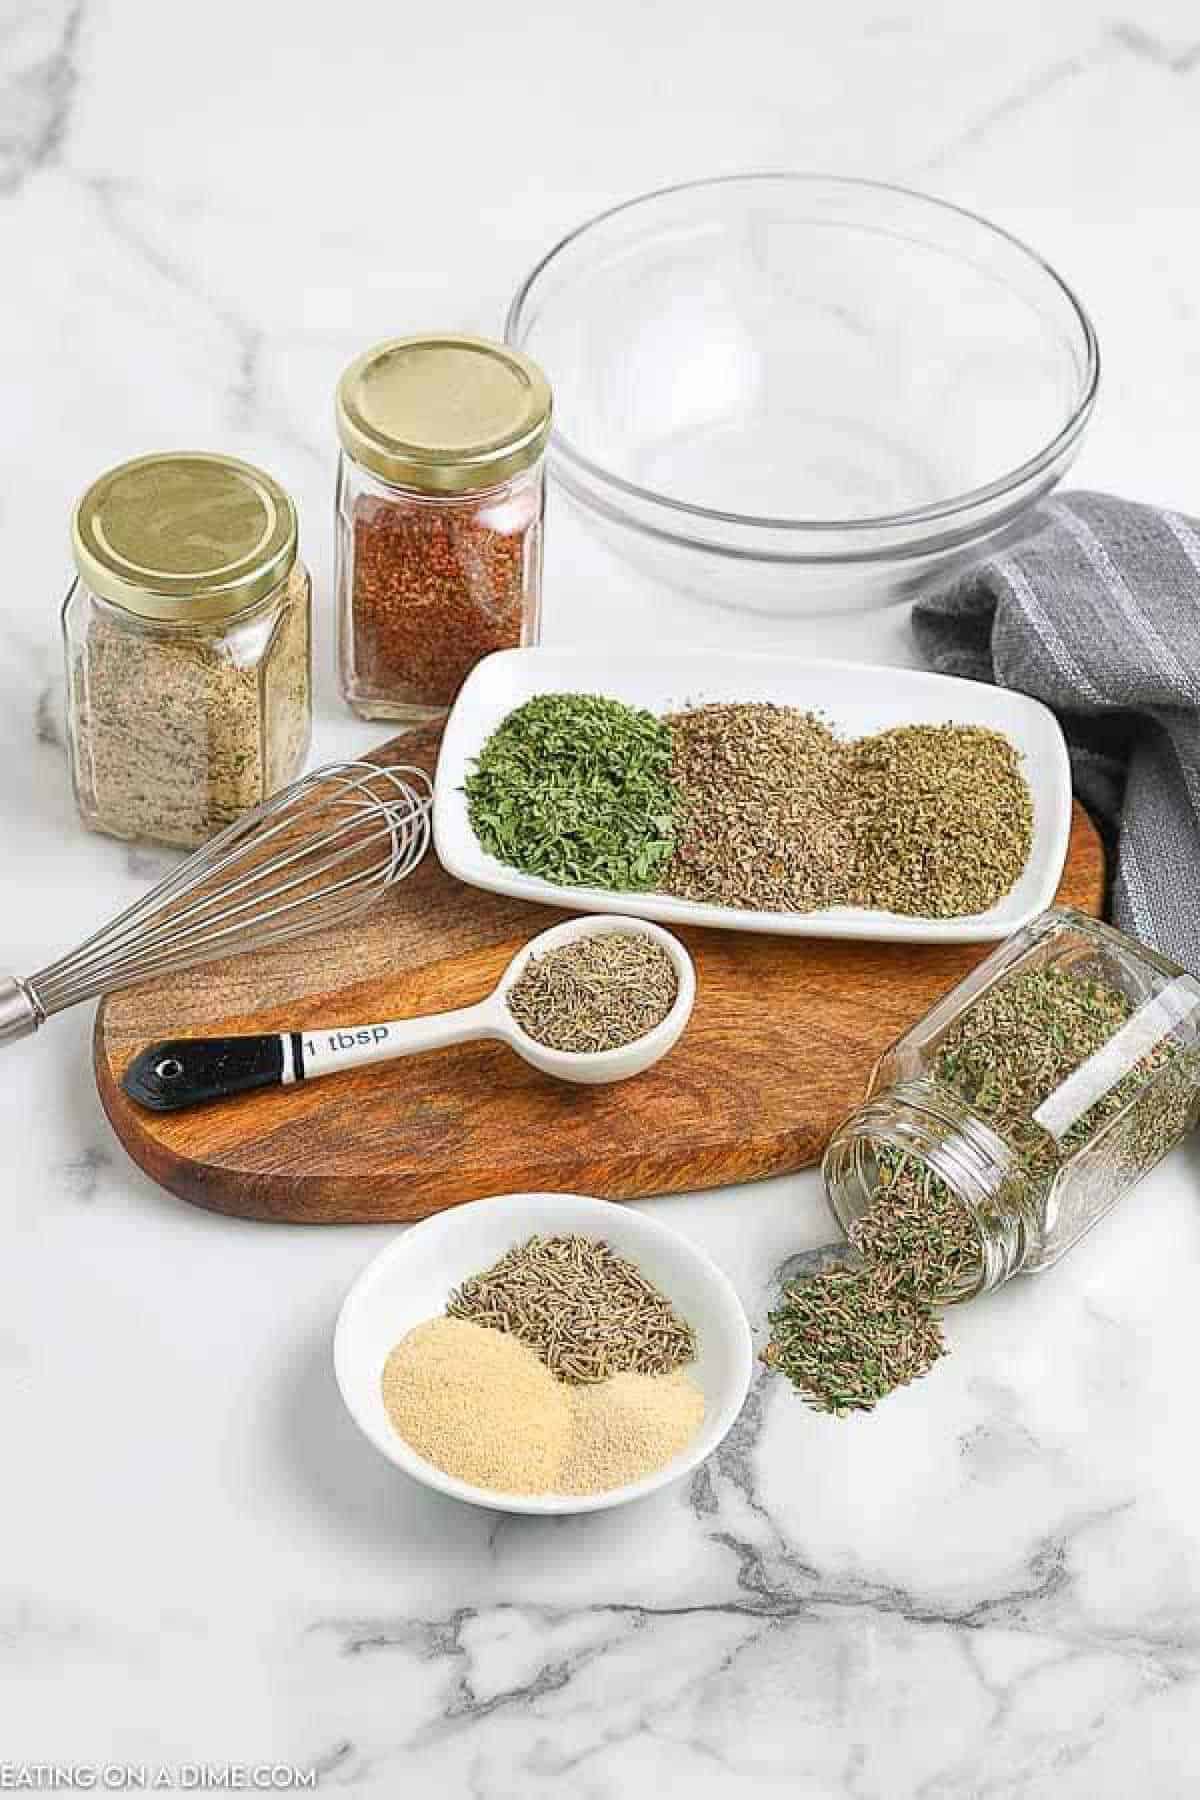 Combining the dried seasoning together in a bowl with jars of seasoning on the side